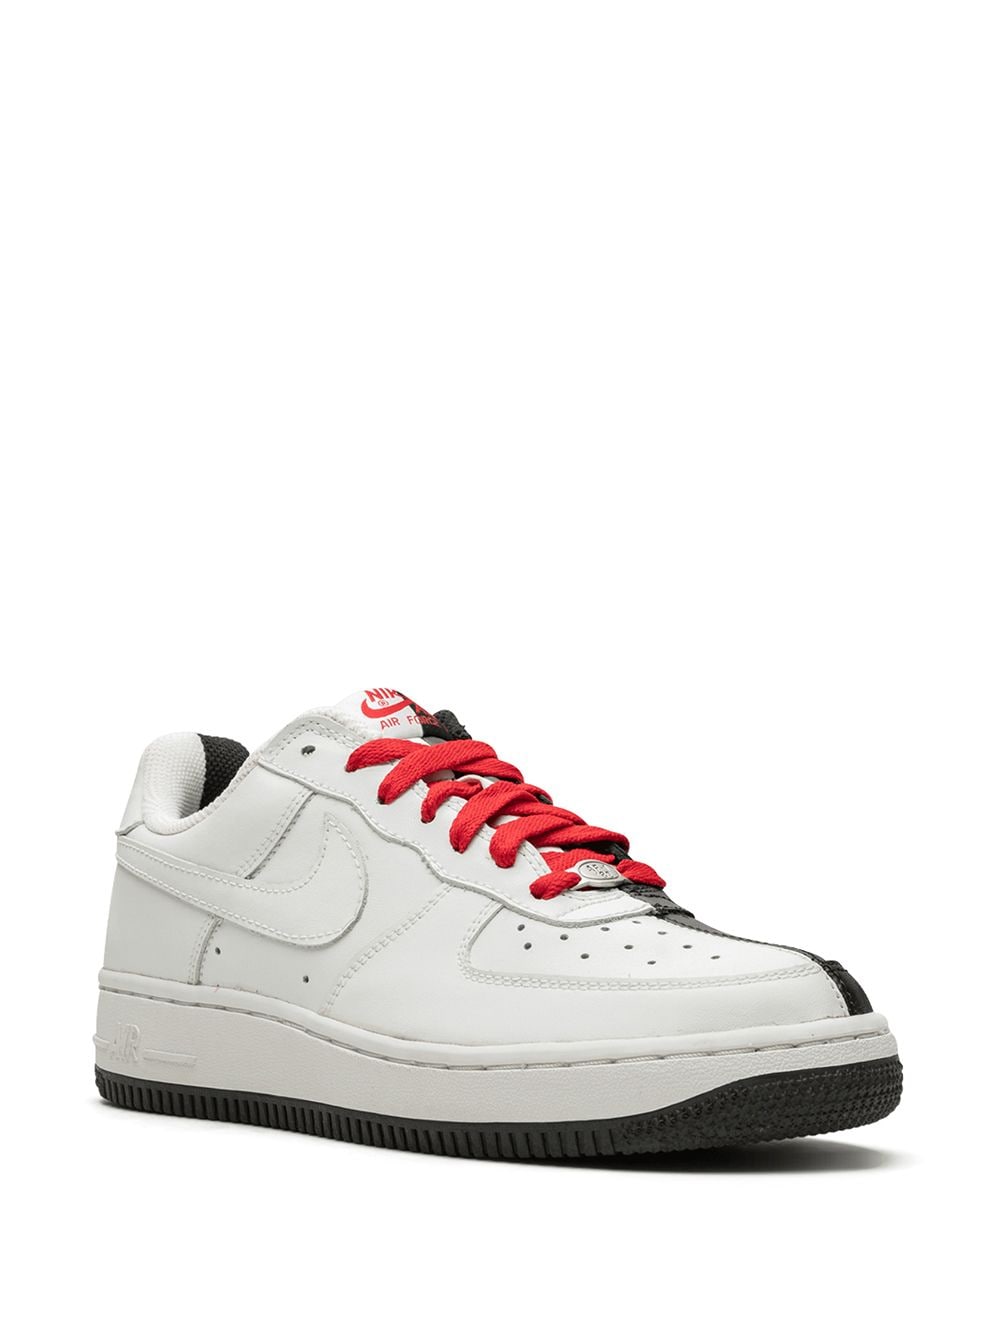 Shop Nike Air Force 1 Low Prem Le Sneakers In White